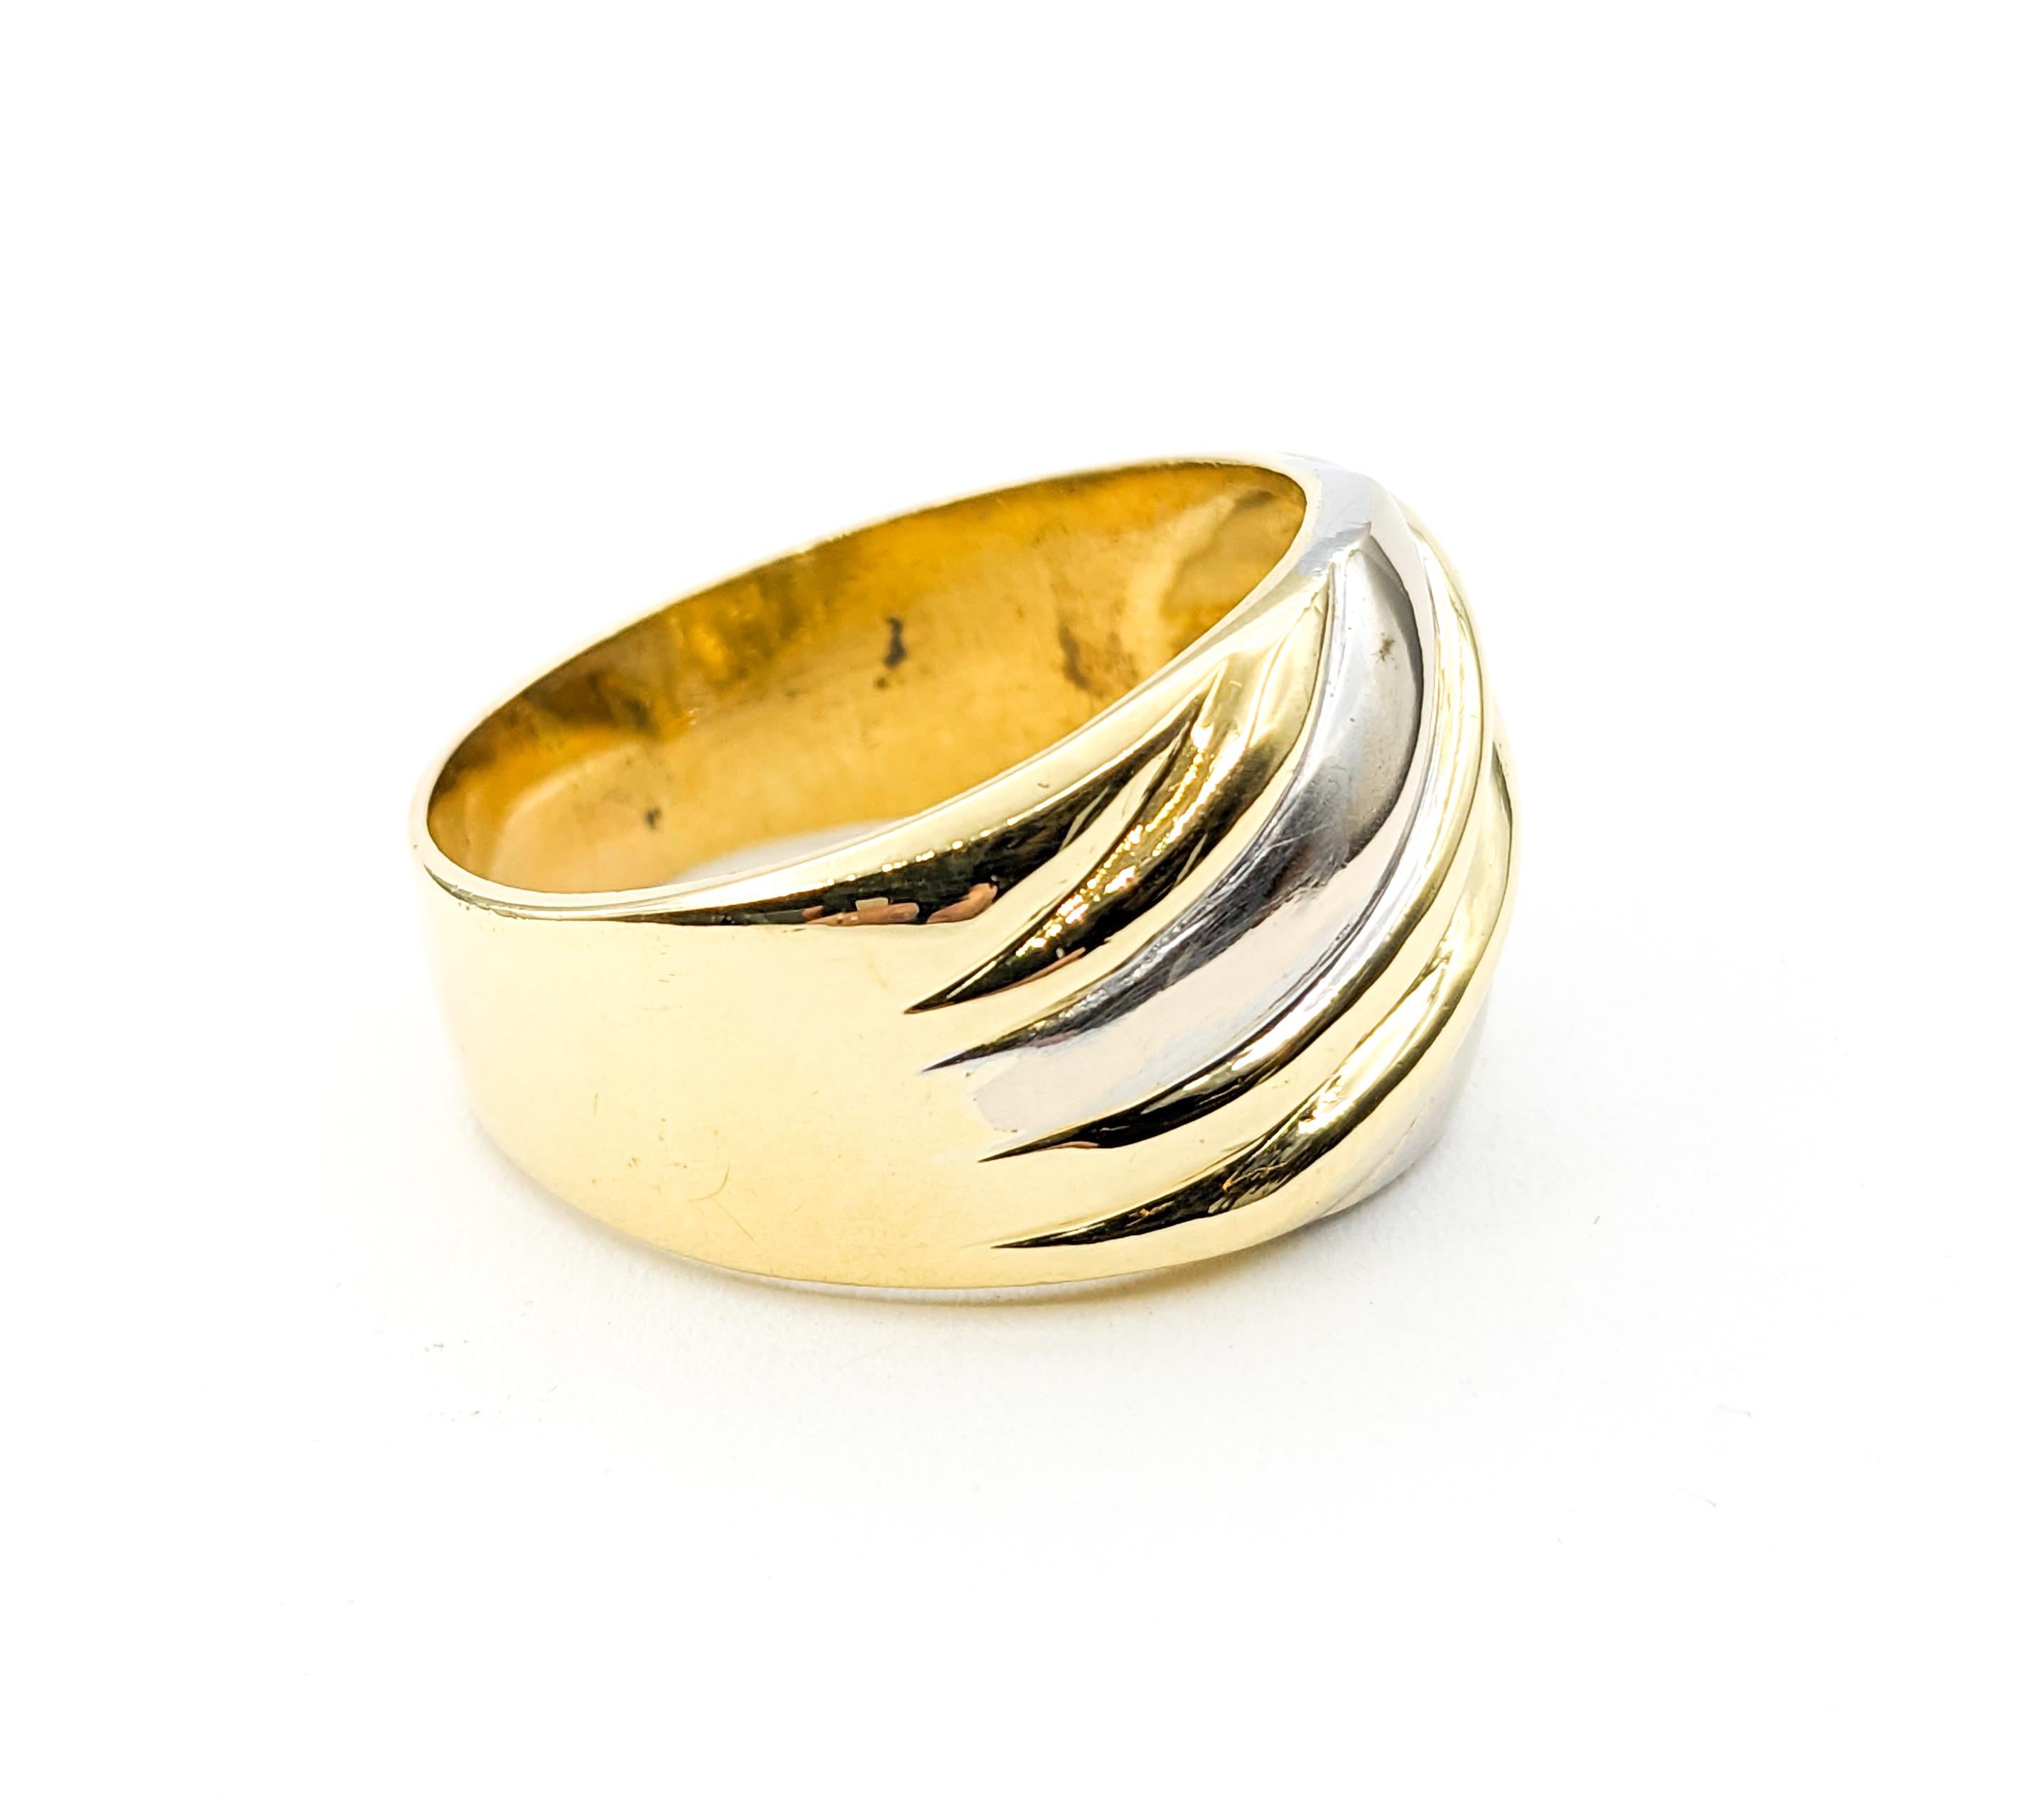 Ribbed Ring In Two-Tone Gold

Discover the allure of our two-tone 18kt Ribbed Ring, a unique and eye-catching piece crafted to make a statement. This distinctive ring, featuring a striking ribbed design in two hues, is currently available in size